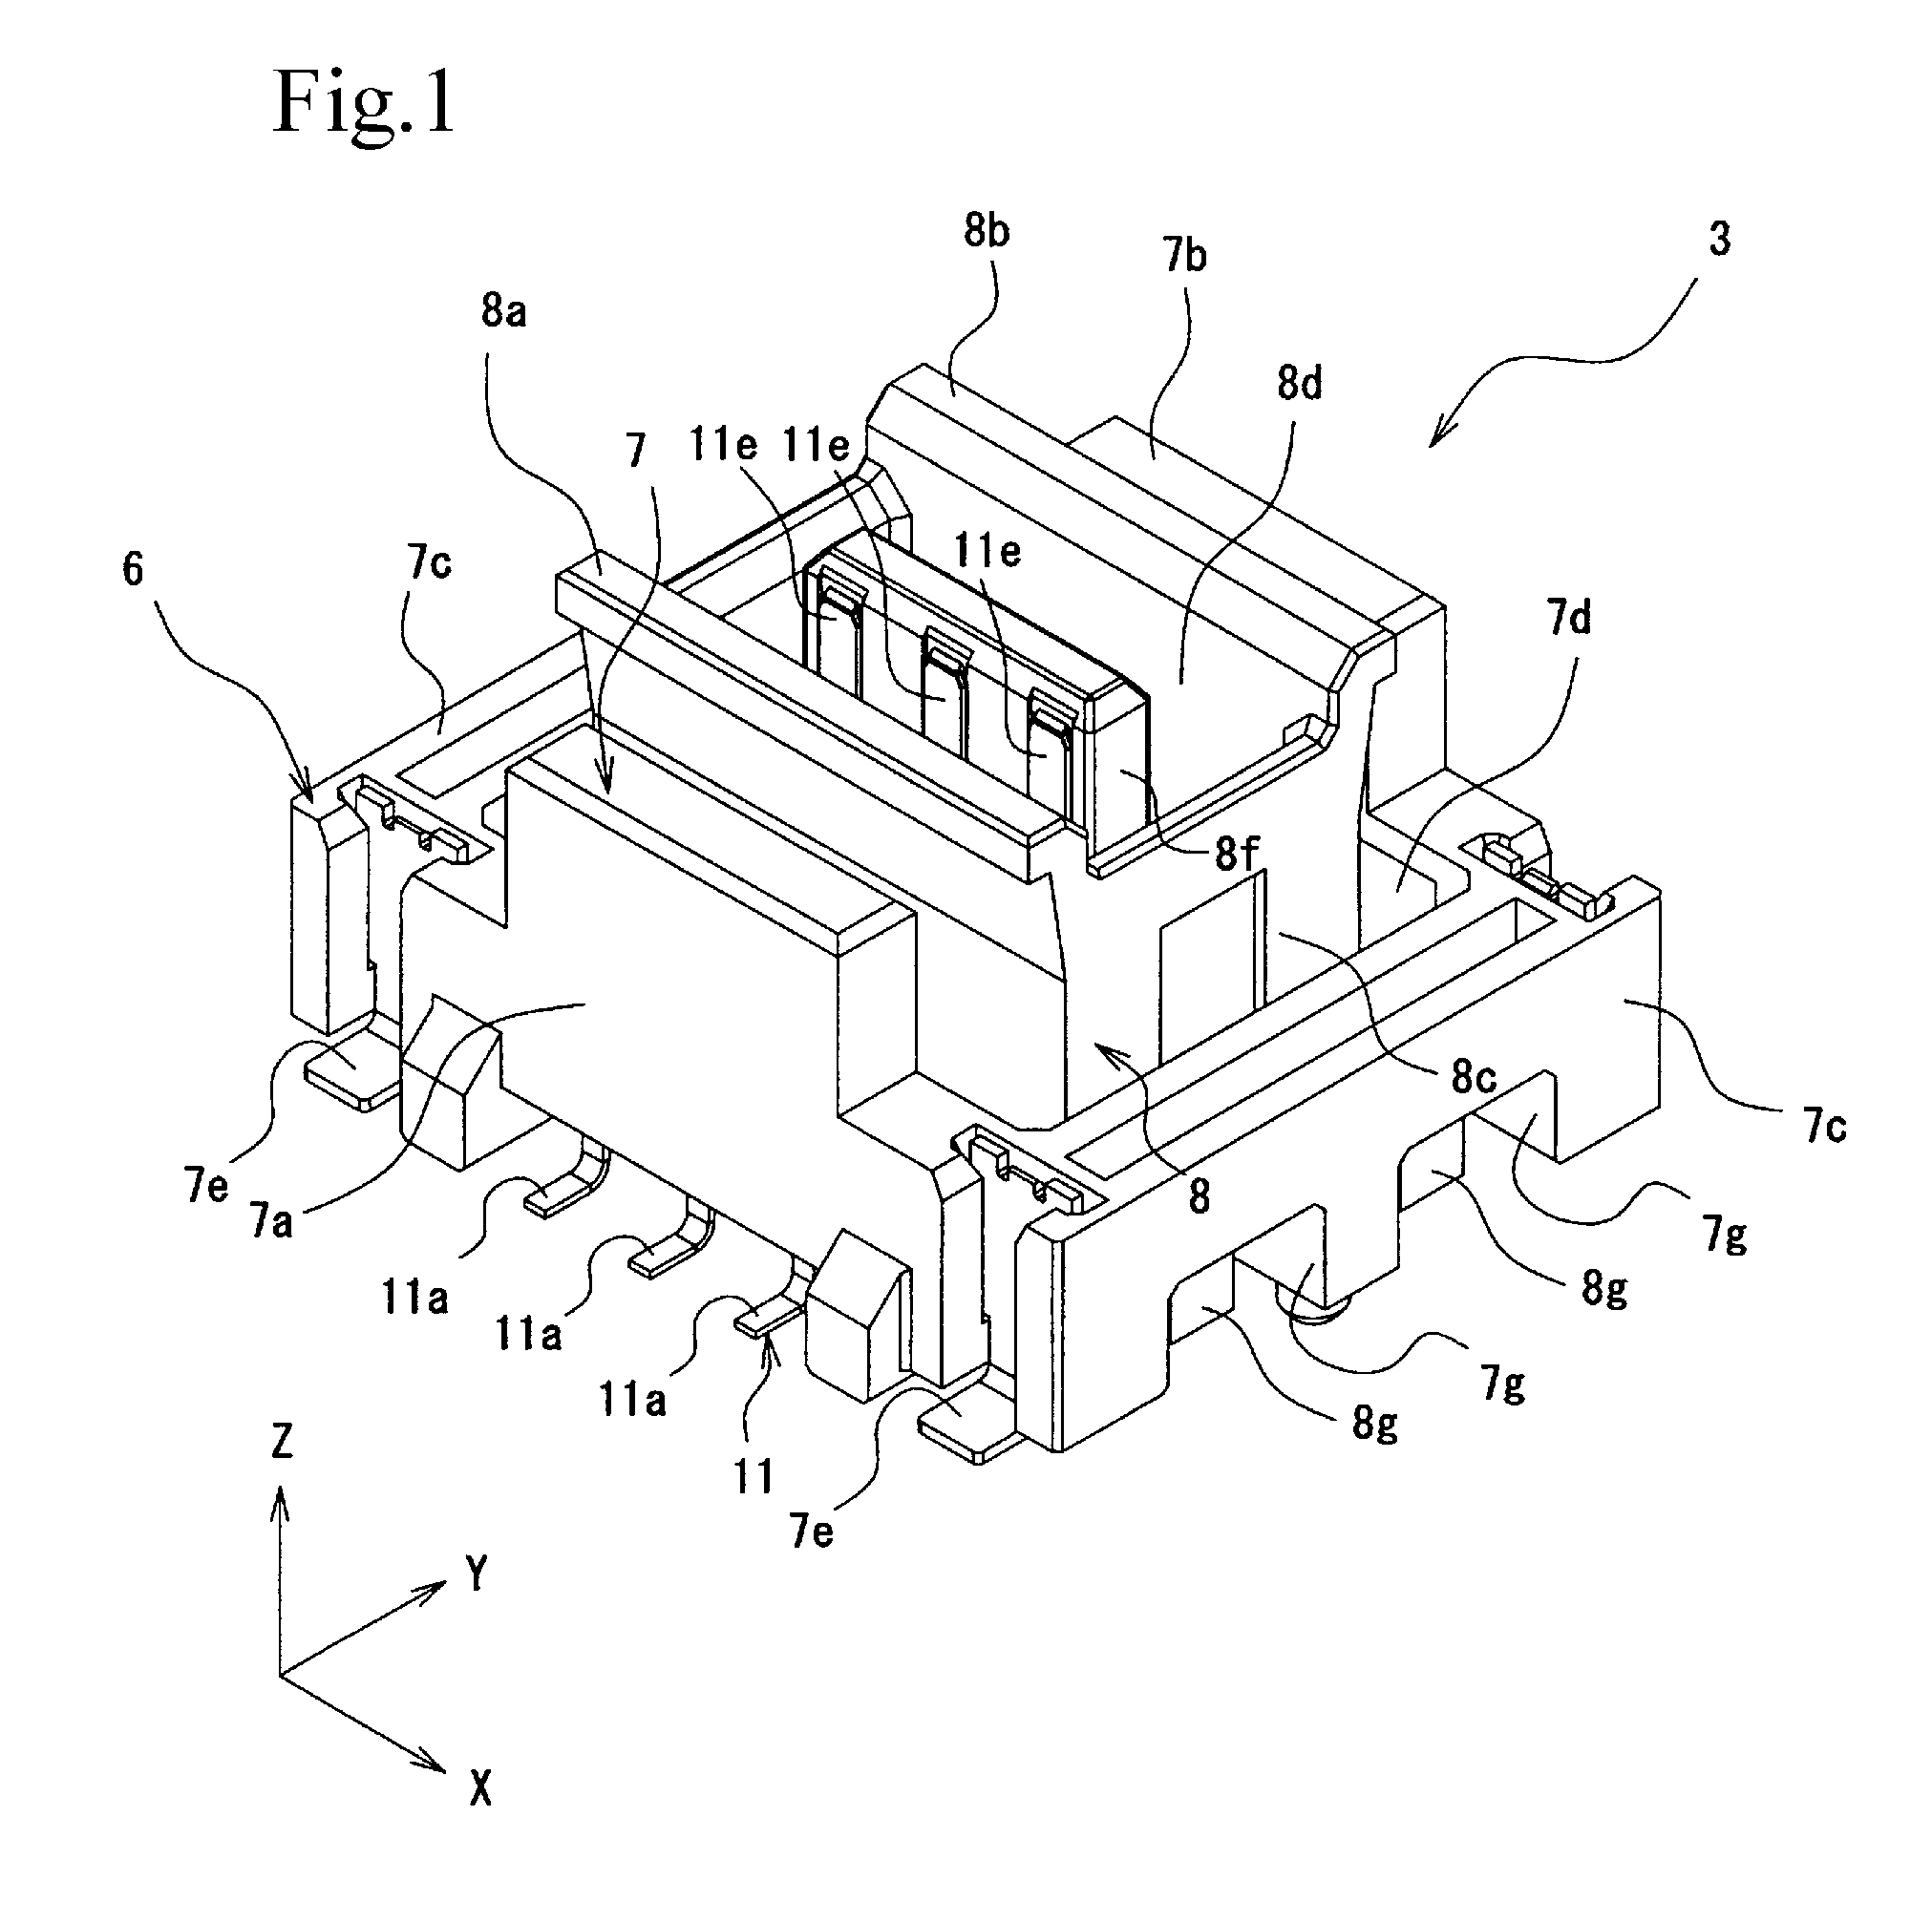 Connector and Substrate Interconnection Structure